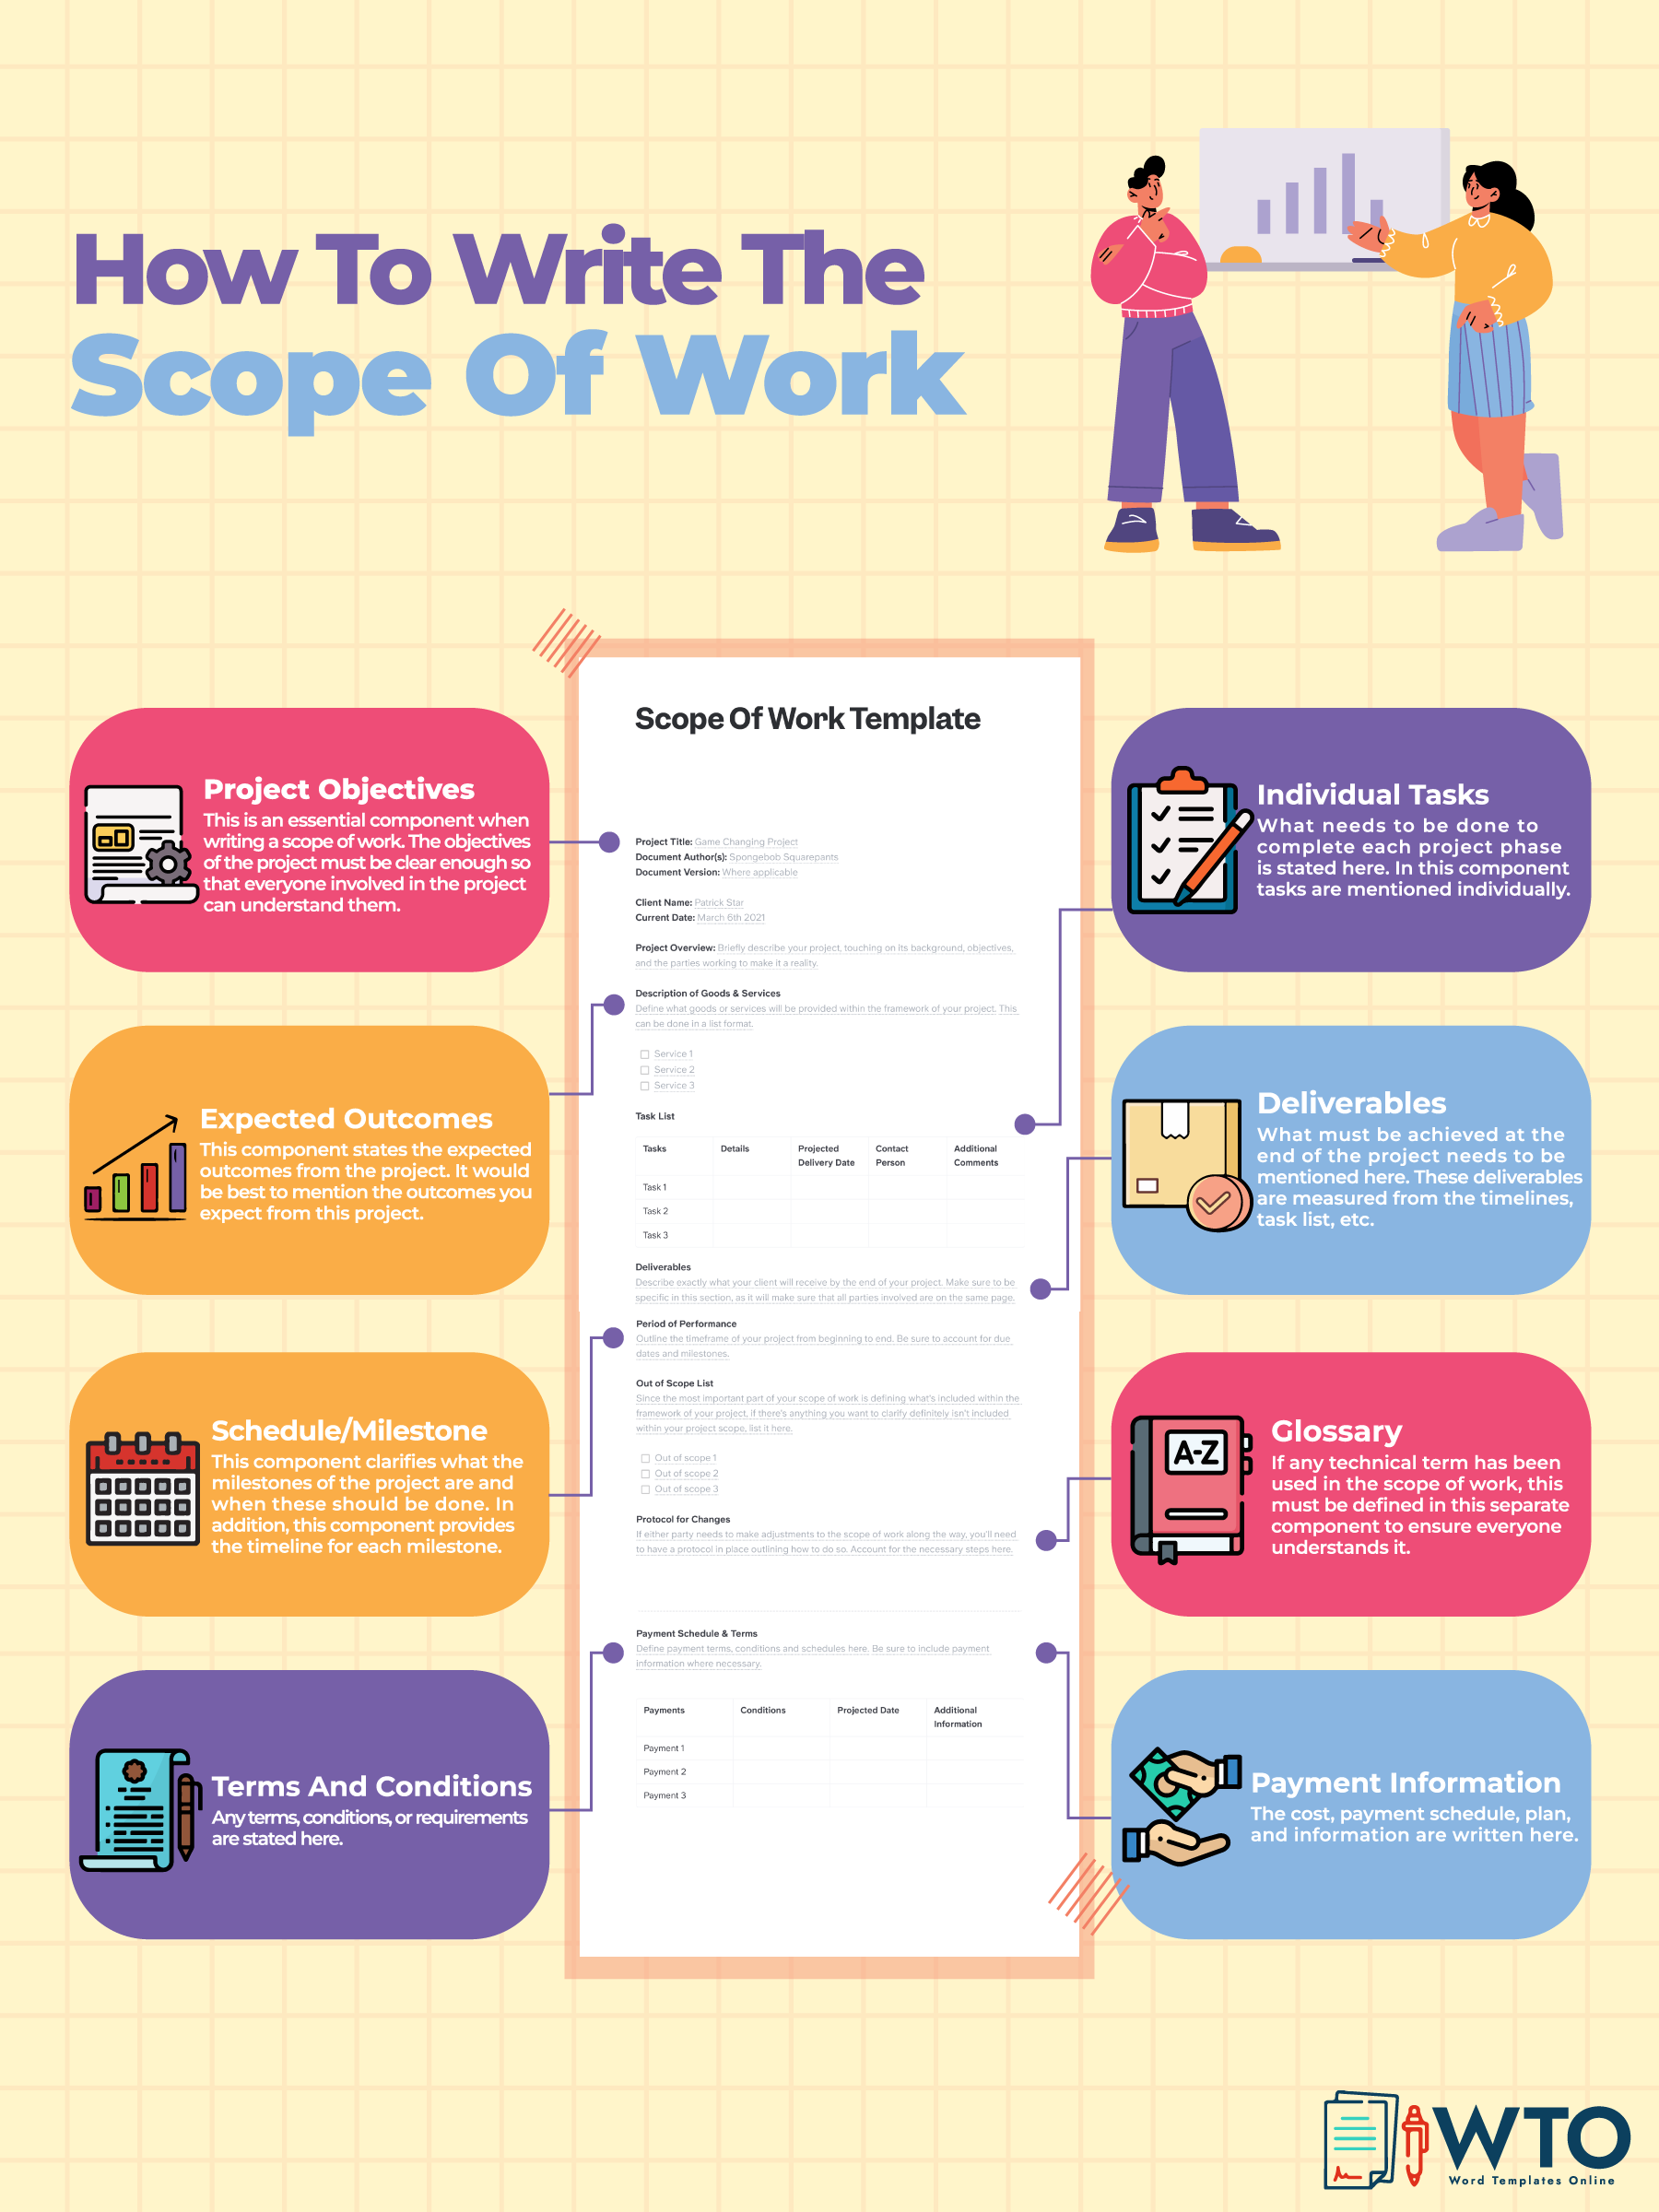 This infographic is about how to write the scope of work.